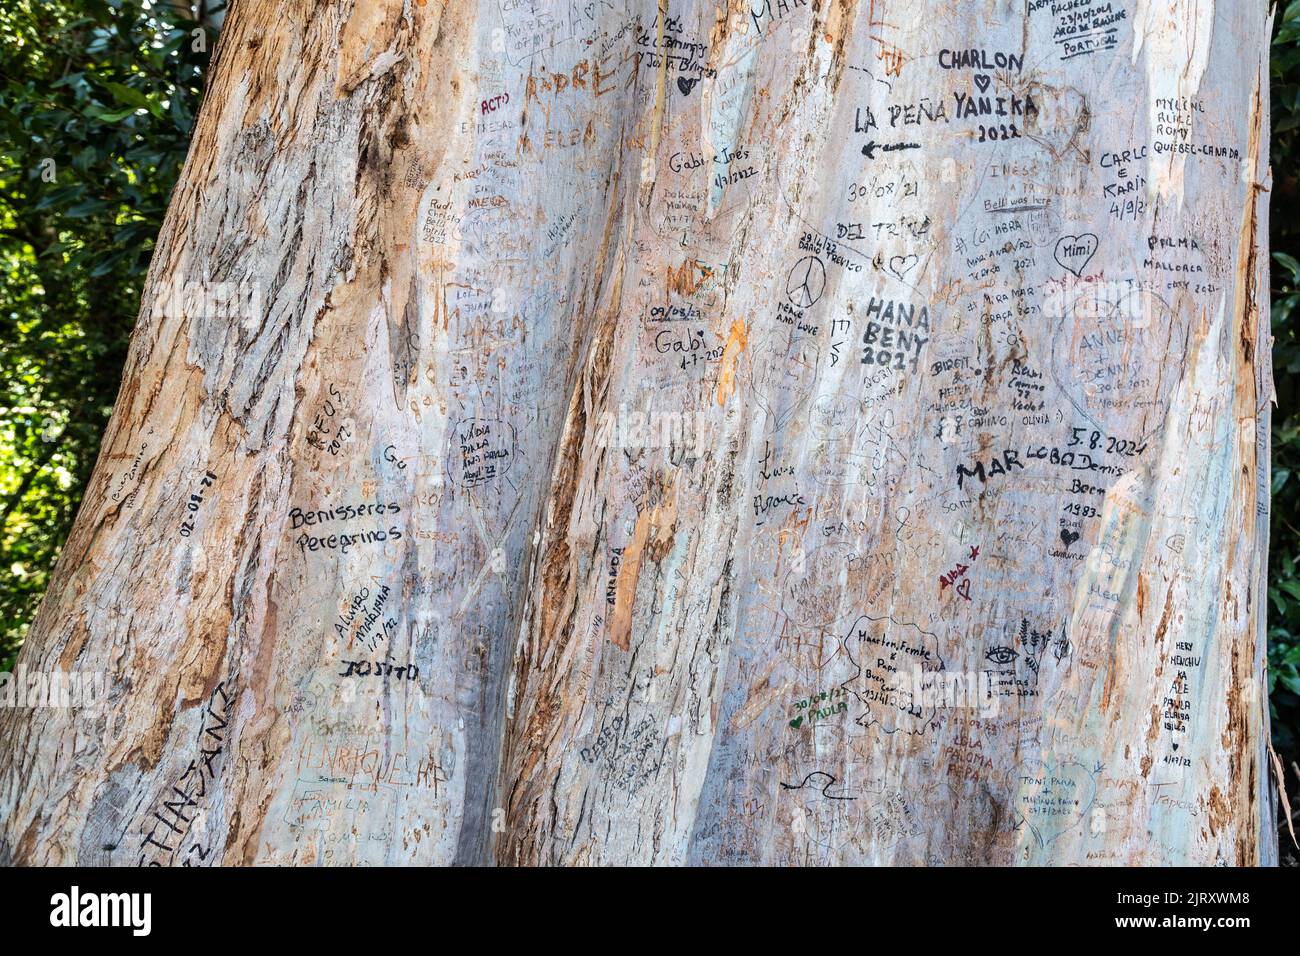 Writing On Tree on  The Camino De Santiago In Spain Stock Photo